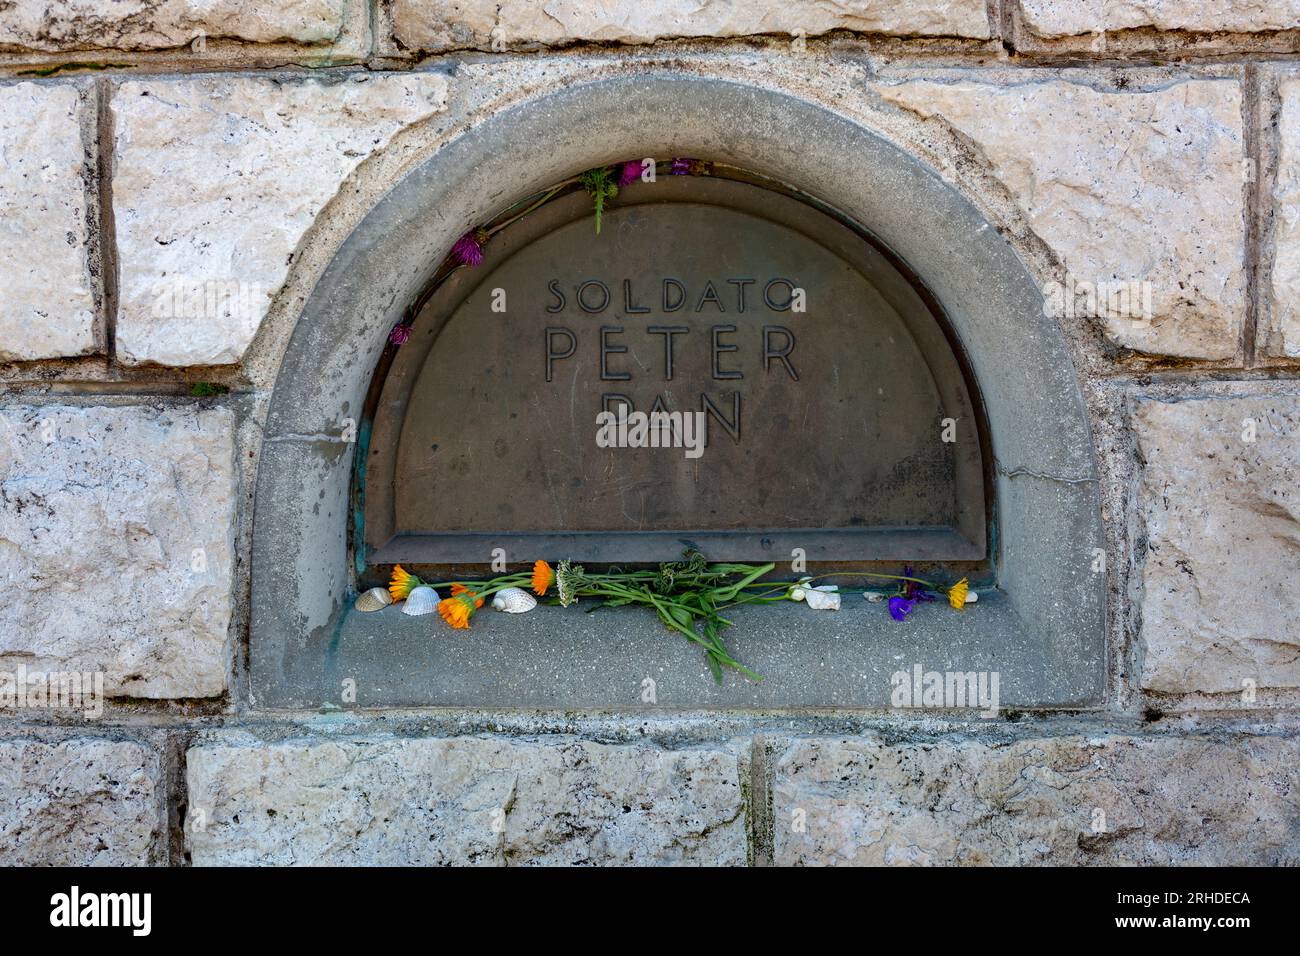 Peter Pan really existed. He was a Hungarian soldier who died on Mount Grappa during the Great War and is now buried in the memorial. Stock Photo